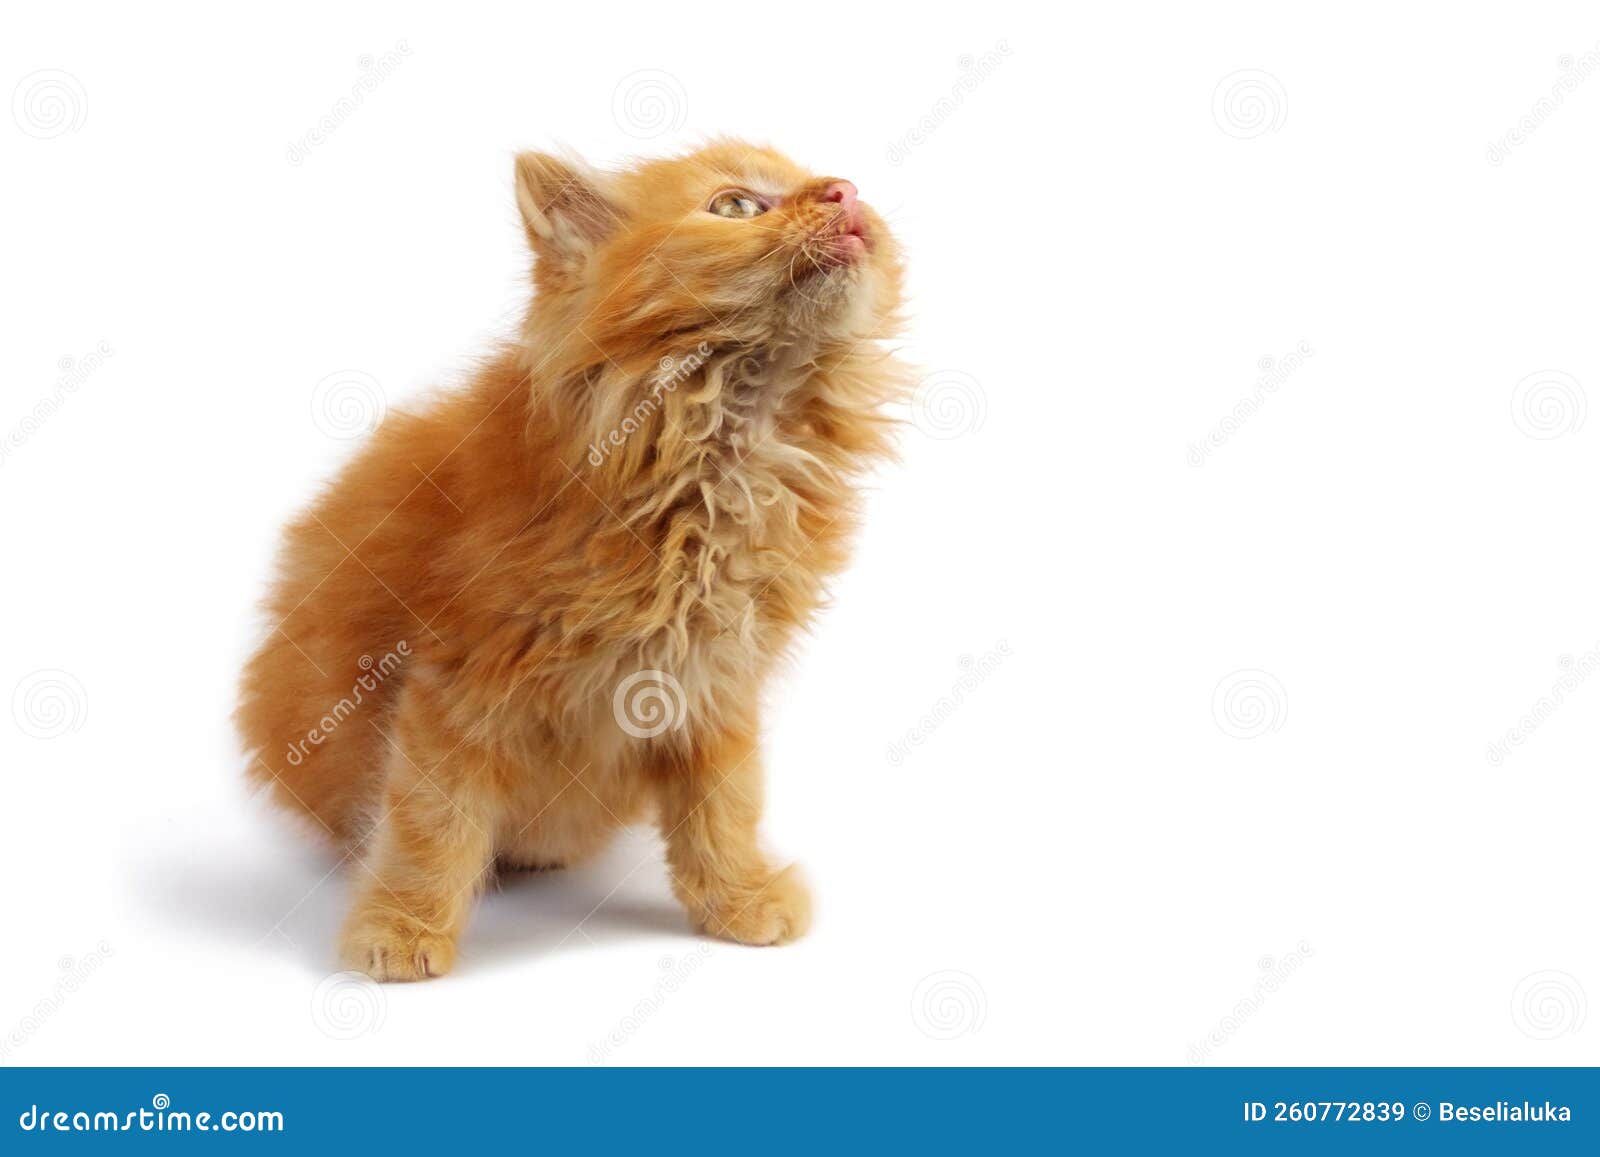 cute red kitten is standing and lookin up